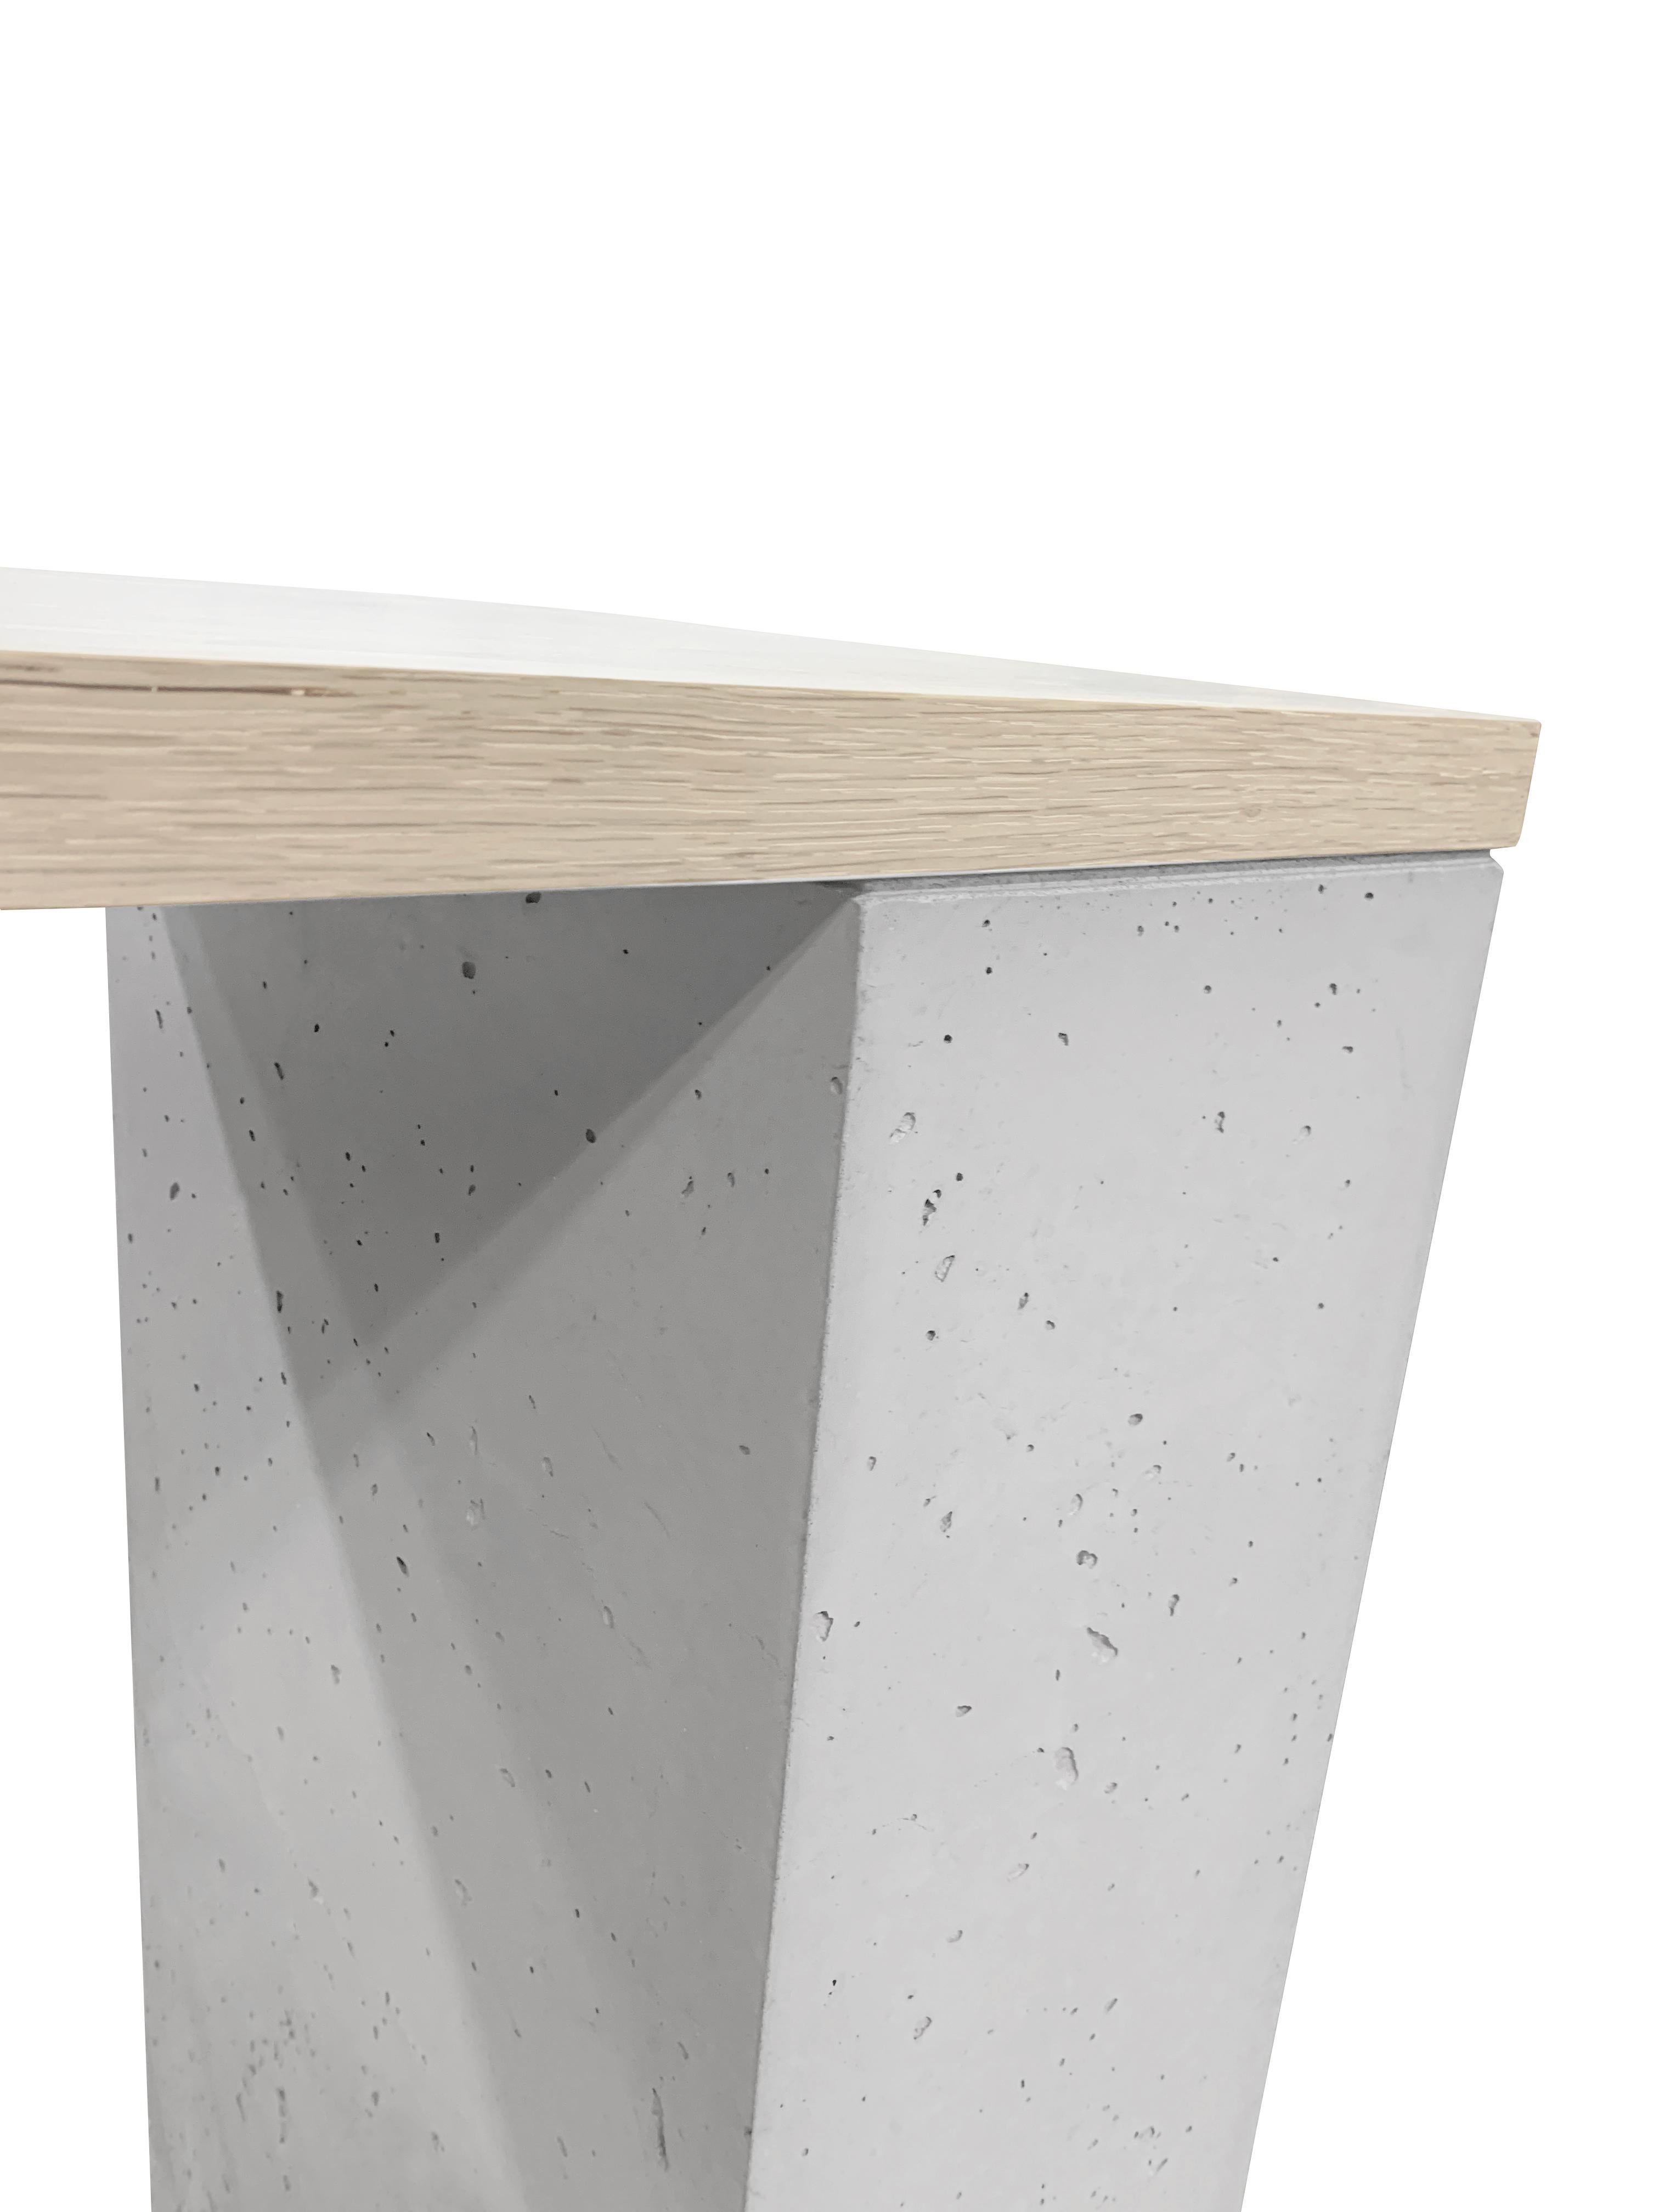 A blackened steel leg with a thru-tenon detail contrasts a bleached and white stained solid White Oak top with cast-concrete leg.

This is a bespoke piece so custom dimensions, materials, colors and finishes (both interior and exterior) can be